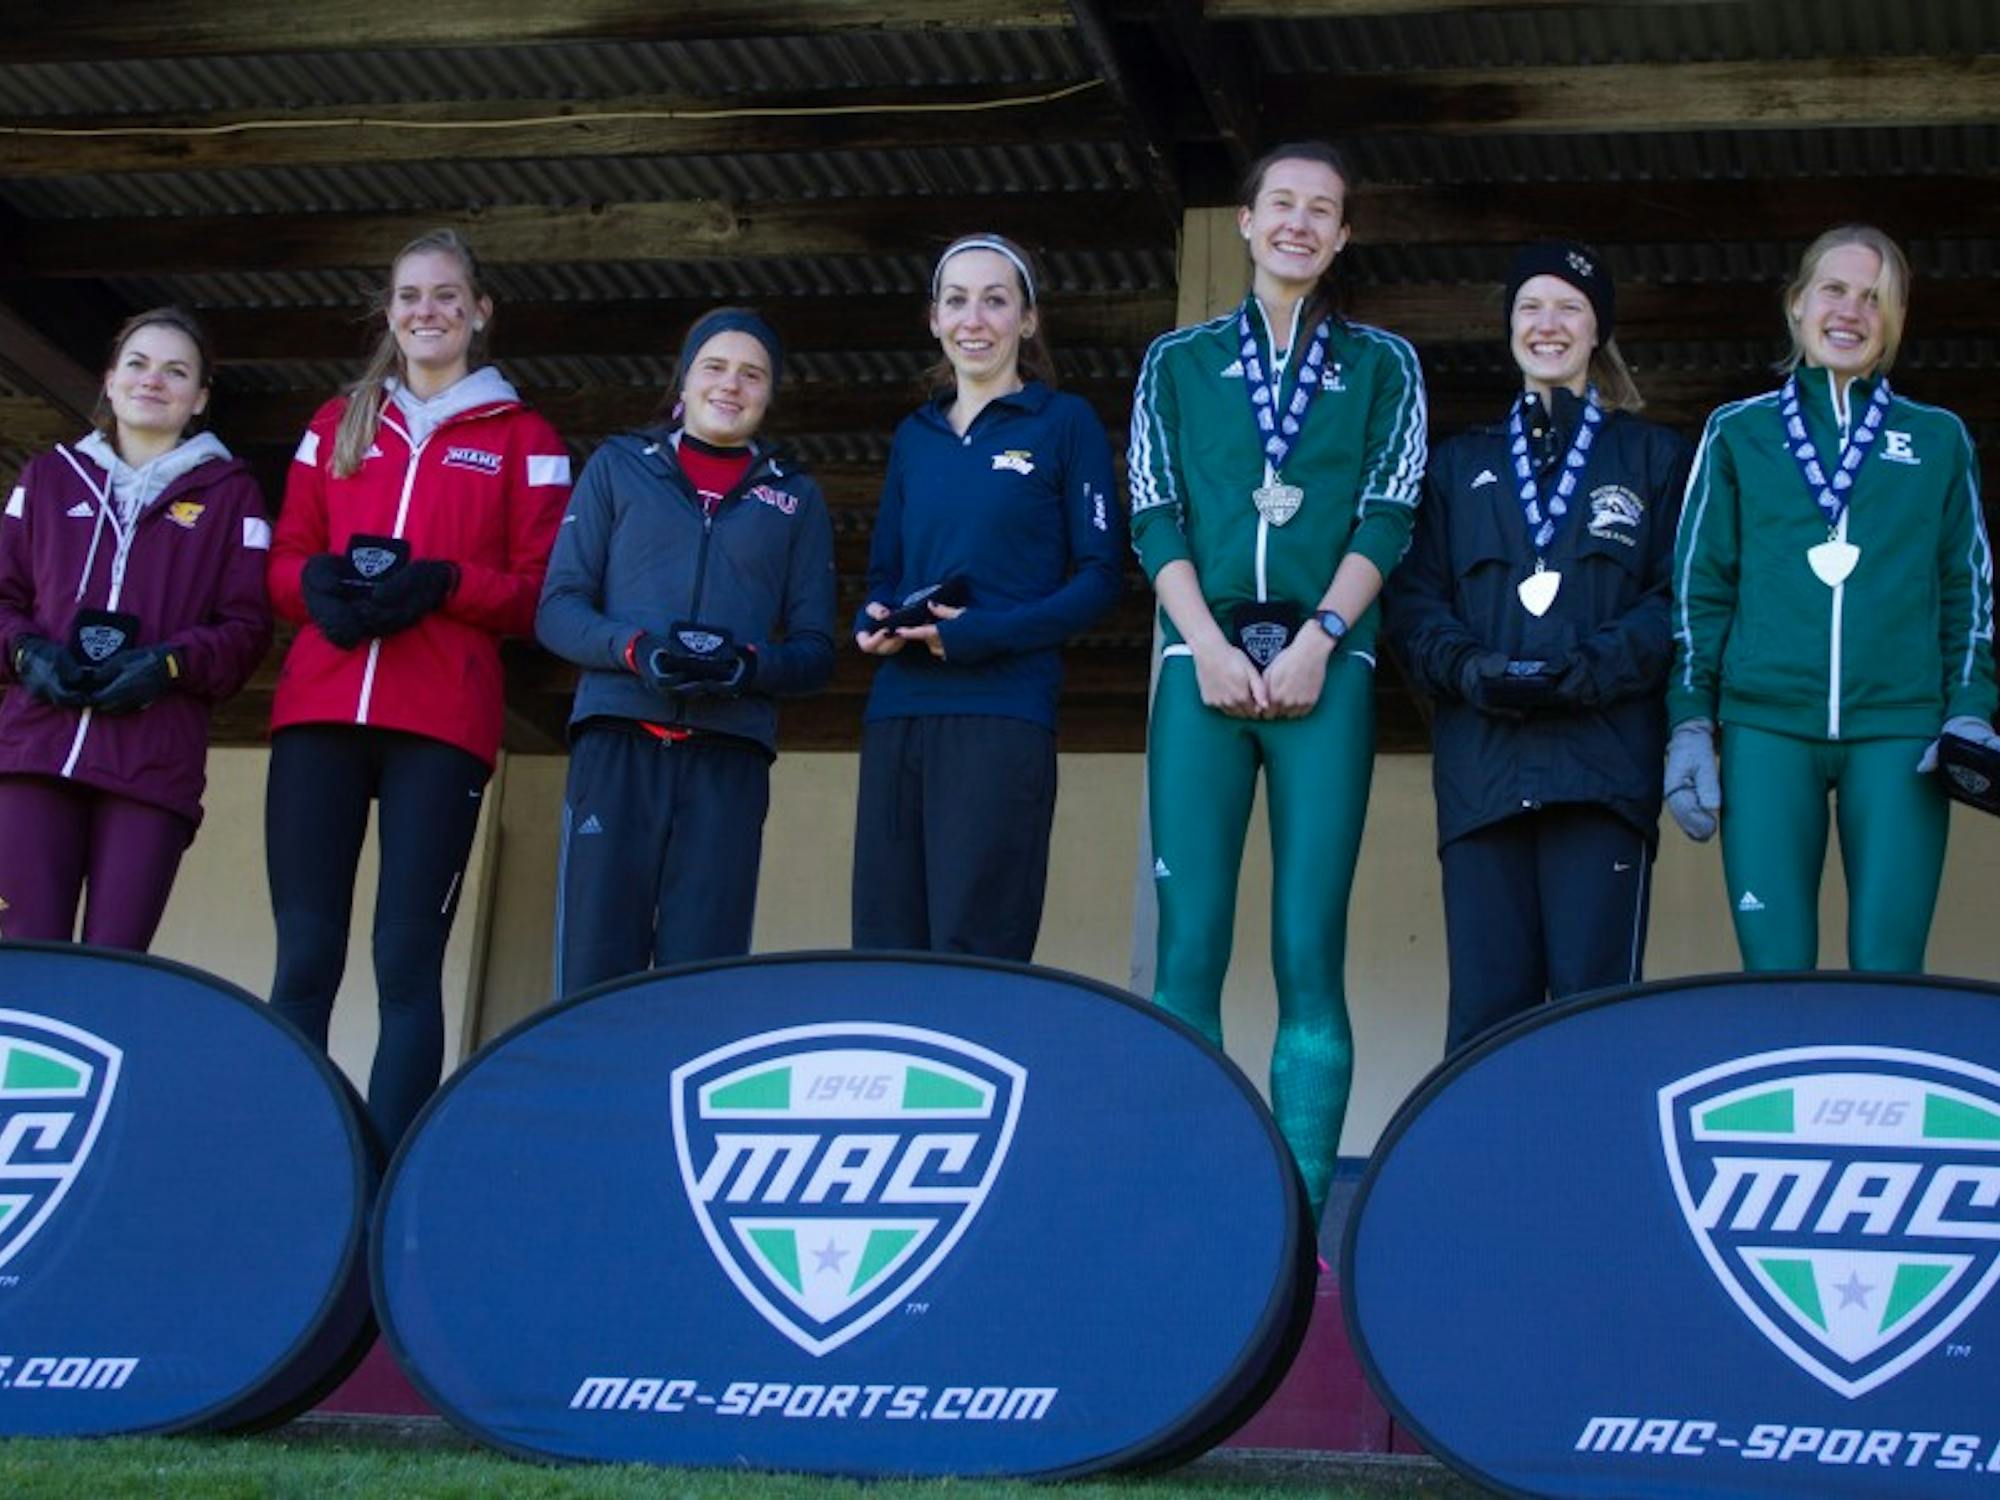 Sofie Gallein and Victoria Voronko are awarded All-MAC team honors during the MAC 
Championship meet at Central Michigan University in Mount Pleasant on Saturday, November 1st, 2014.